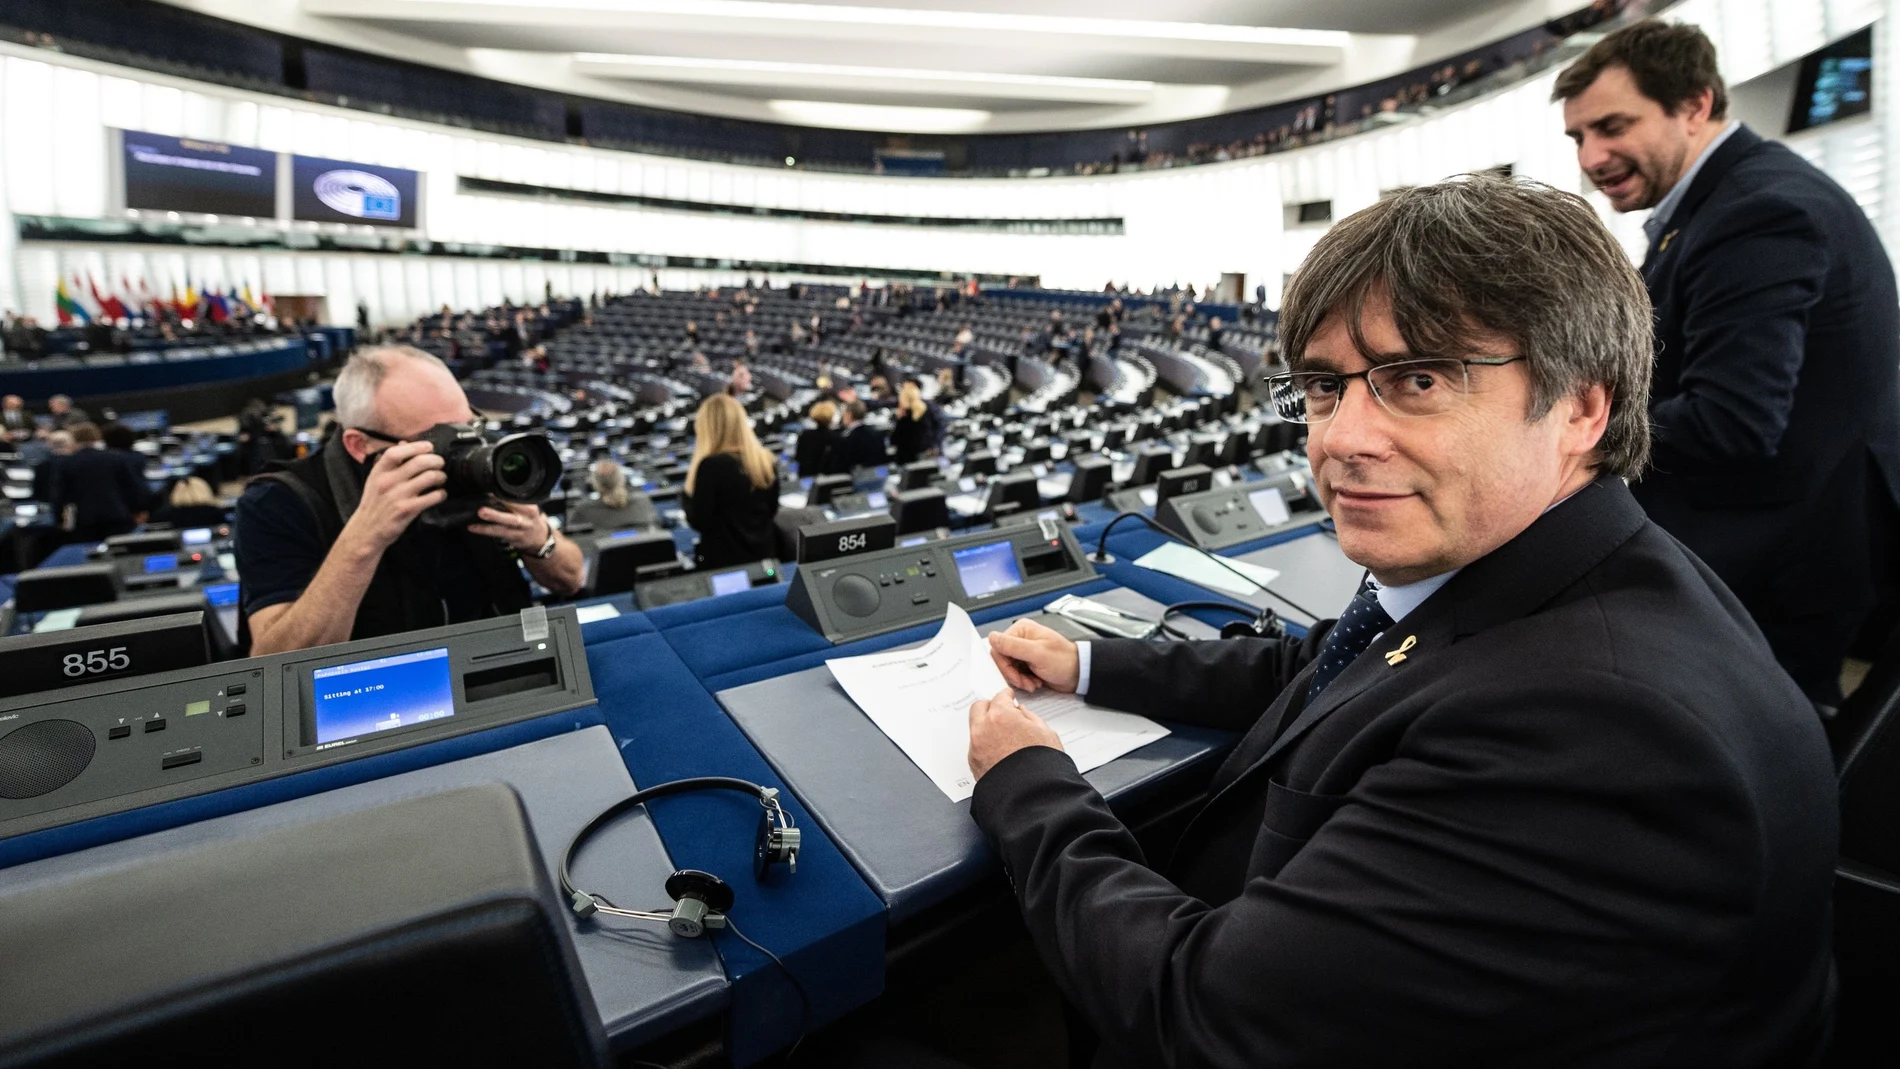 Former members of the Catalan government Toni Comin (R) and Carles Puigdemont (L) wait for their first plenary session as member of the European Parliament in Strasbourg, France, 13 January 2020.